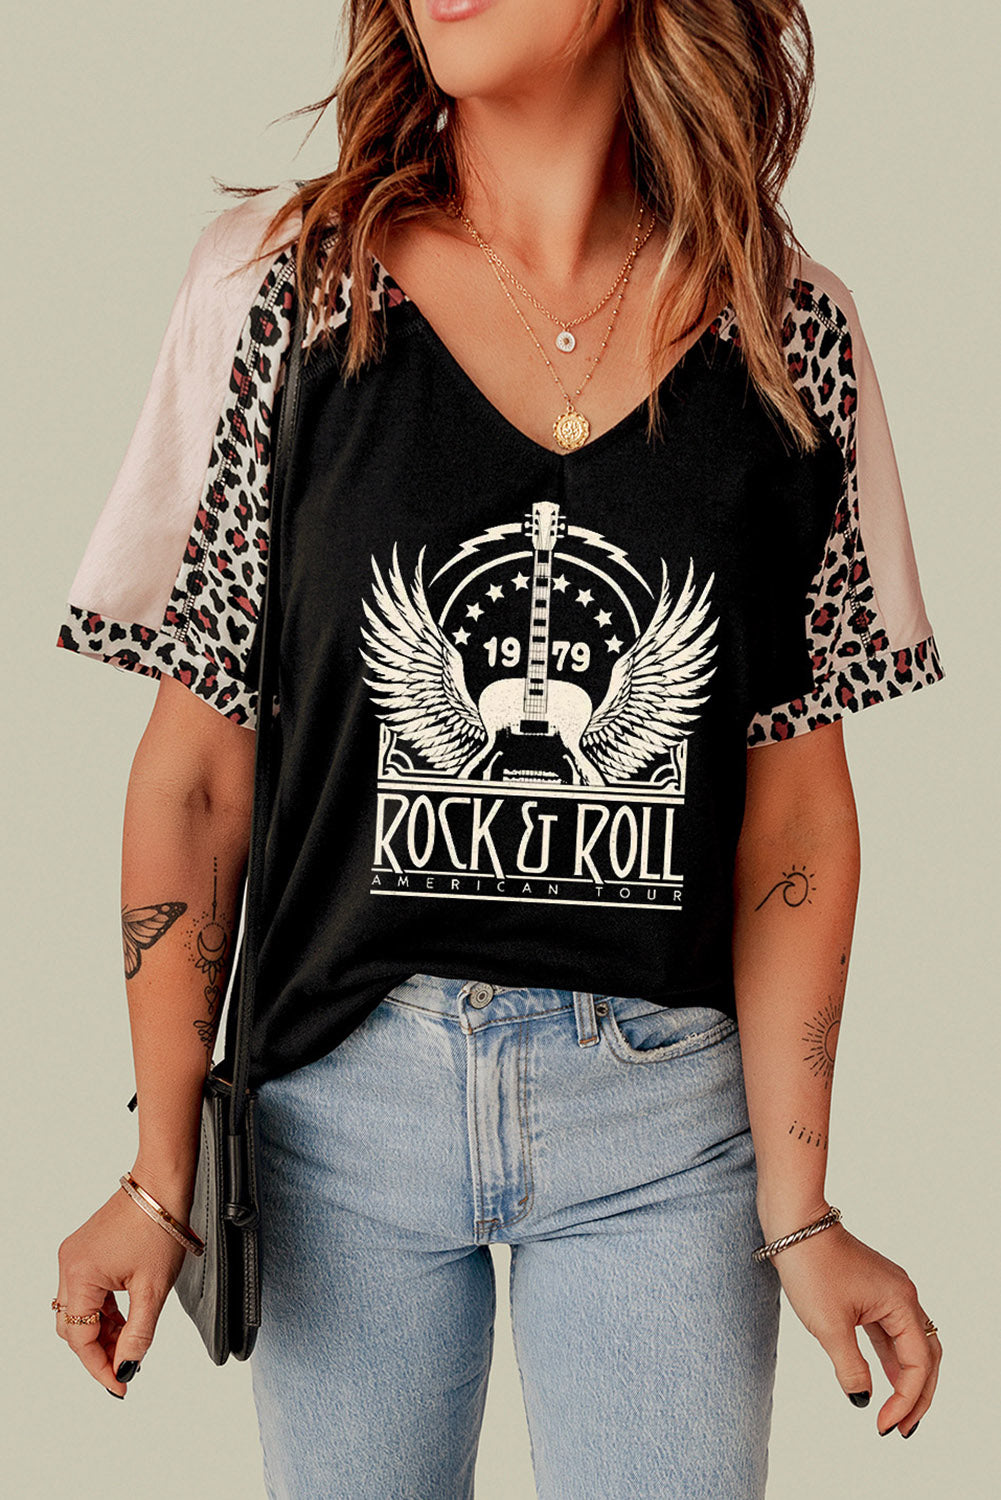 1979 ROCK & ROLL AMERICAN TOUR Graphic V-Neck Tee - nailedmoms